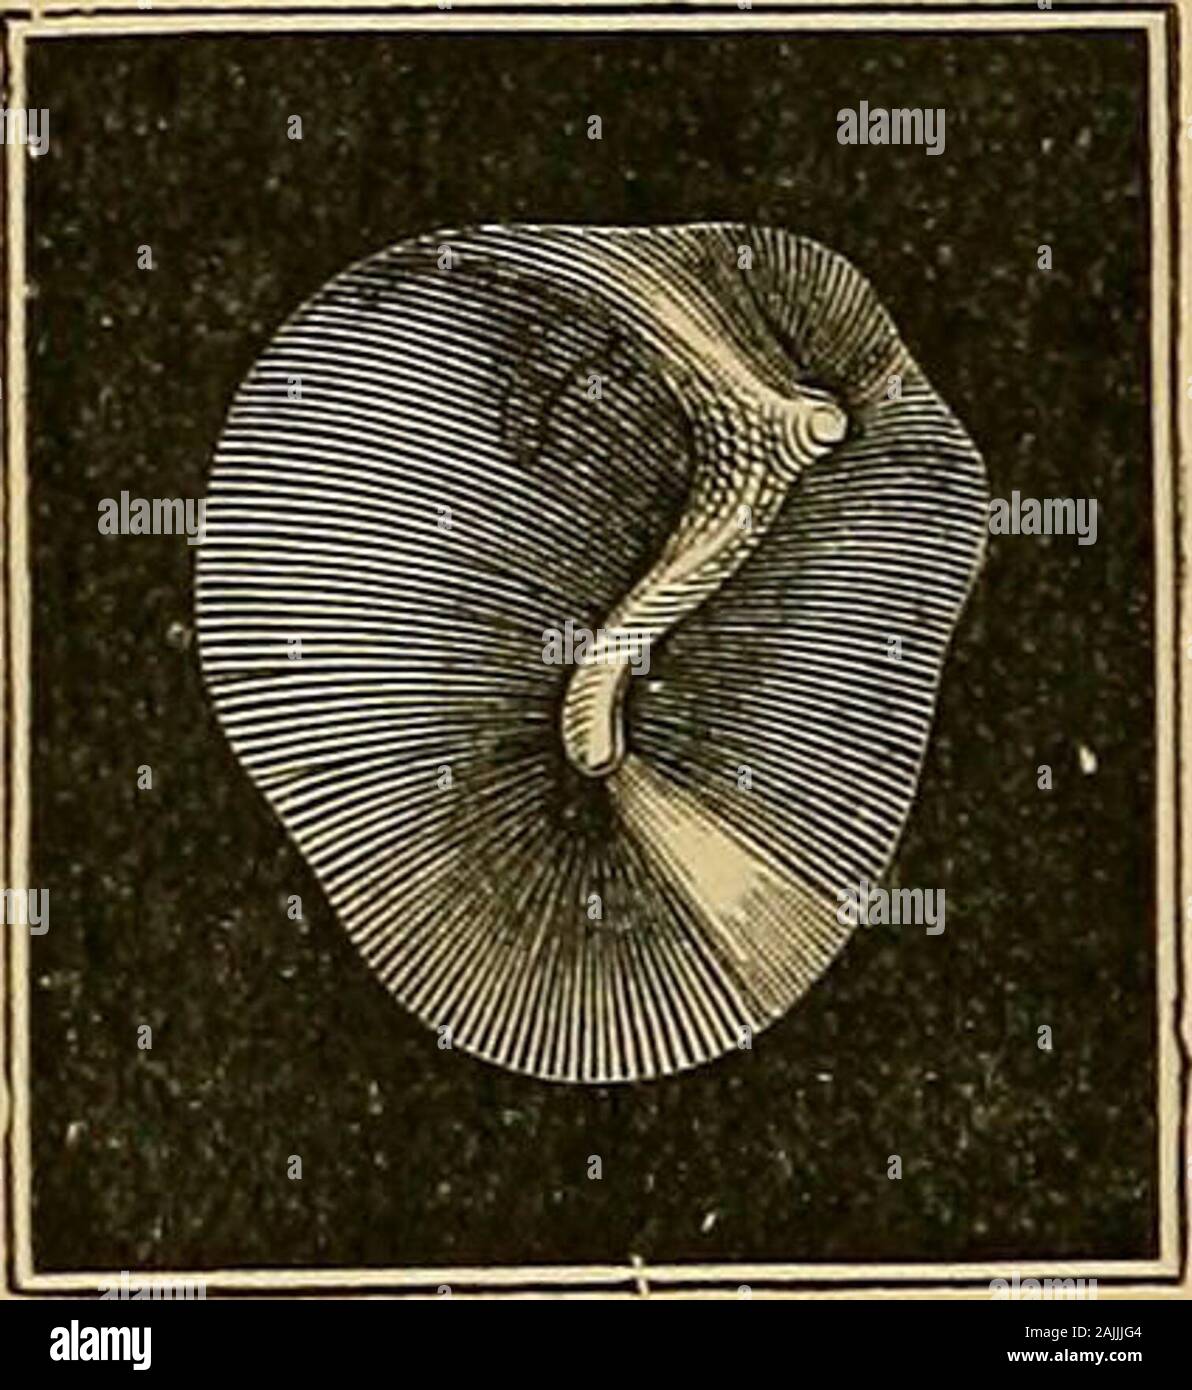 A text-book of the diseases of the ear for students and practitioners . chr., 1895. t M-/? 0., 1899. 74 DISEASES OF THE EAR In childhood the nienibrane-often appears somewhat gray, opaque and dim,and what is very striking is the fact that the membrane is of a much deepergray, and that the promontory is less often seen shining through. Changesare just as frequently found in old age, which are characterized by a uni-formly gray lustreless appearance of the membrane. In examining the tympanic membrane, our attention is nextdrawn to the short process of the hammer (Figs. 69 and 70),which protrudes Stock Photo